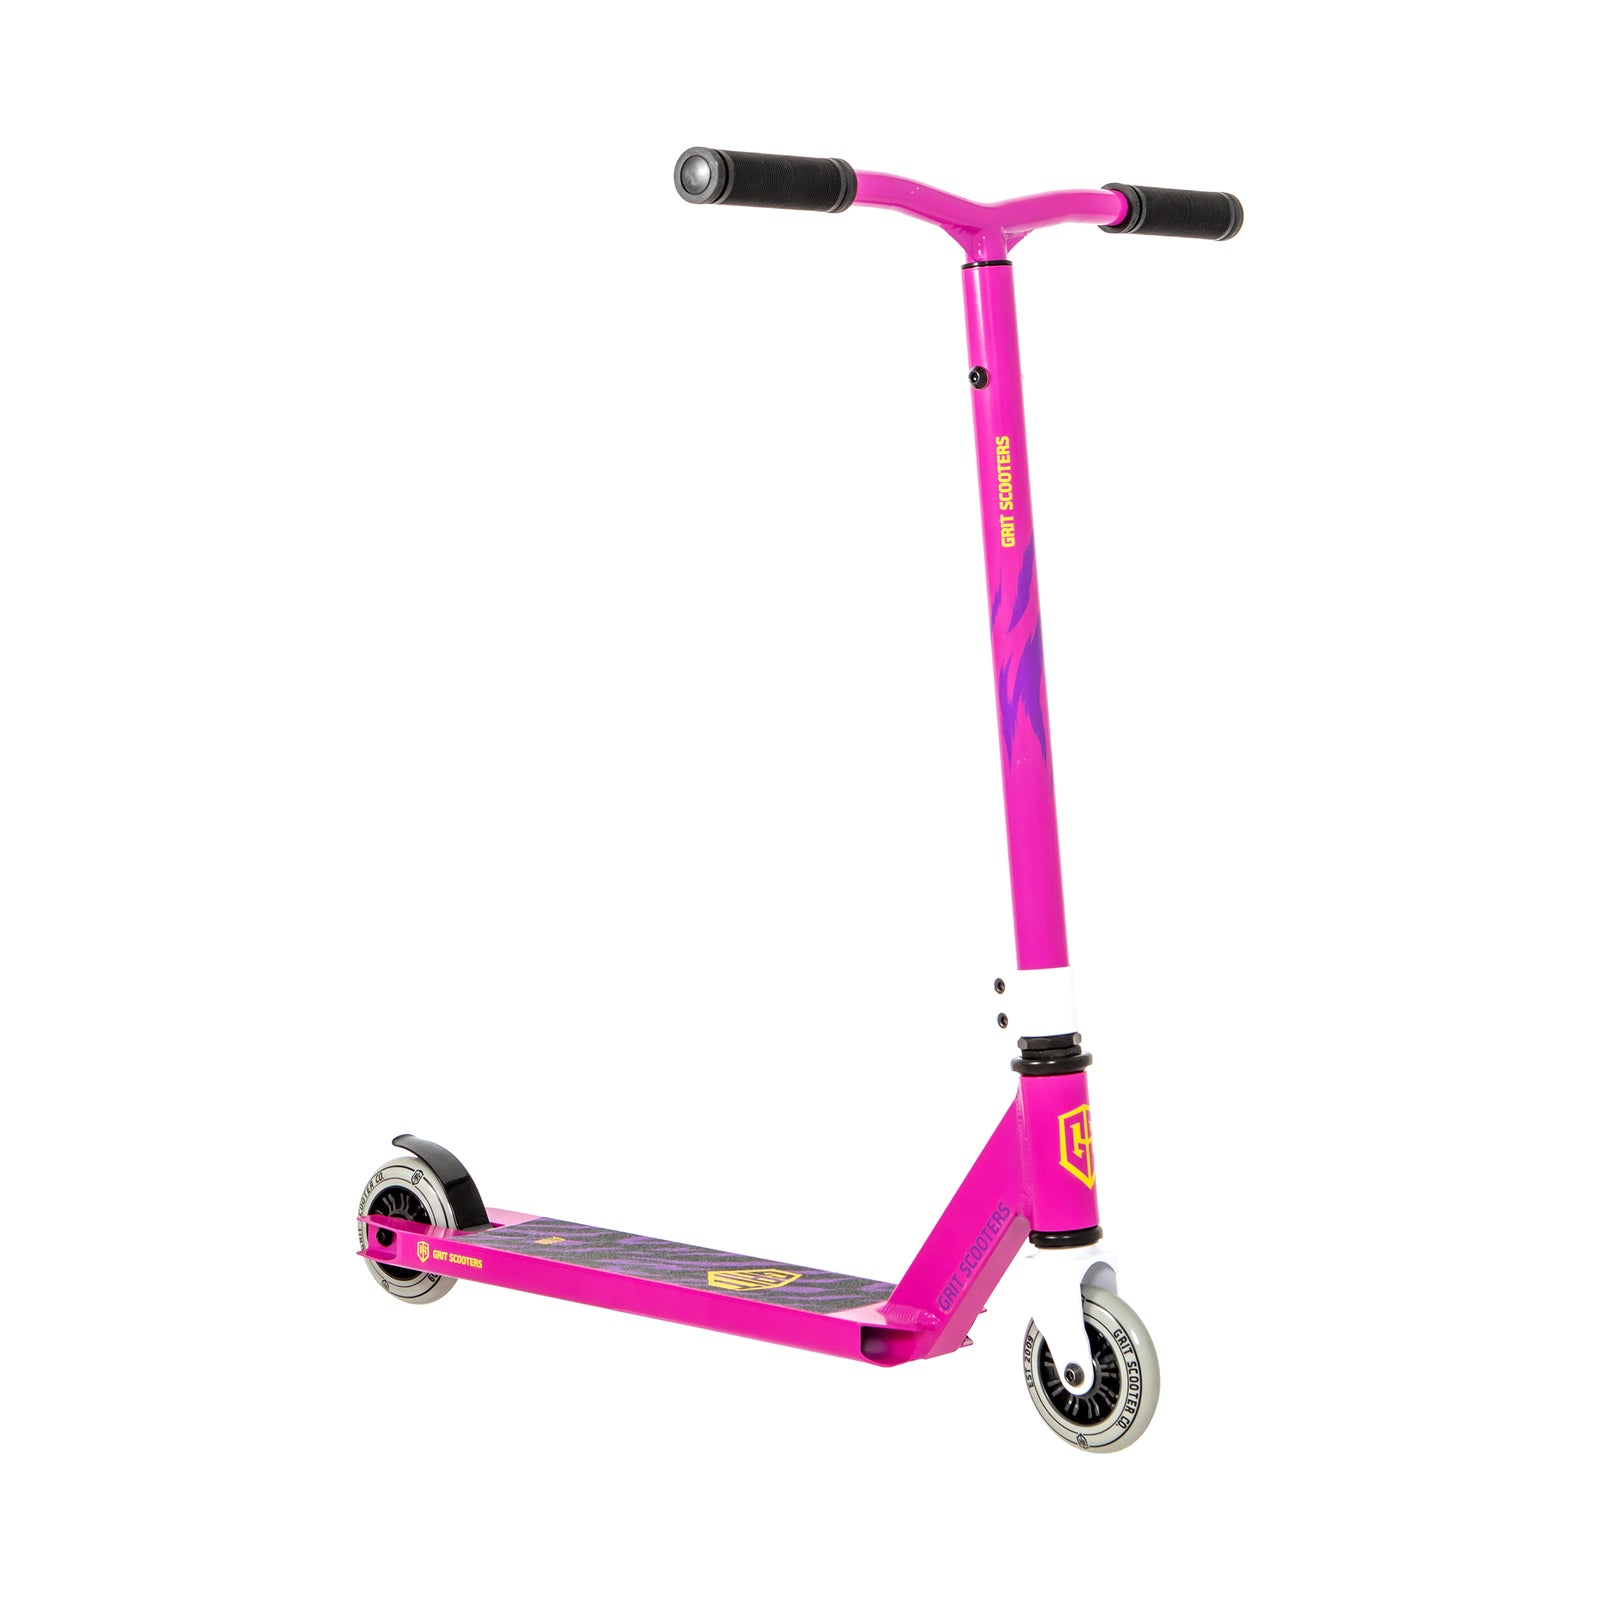 GRIT ATOM PINK - 2 PIECE / 2 HEIGHT BARS